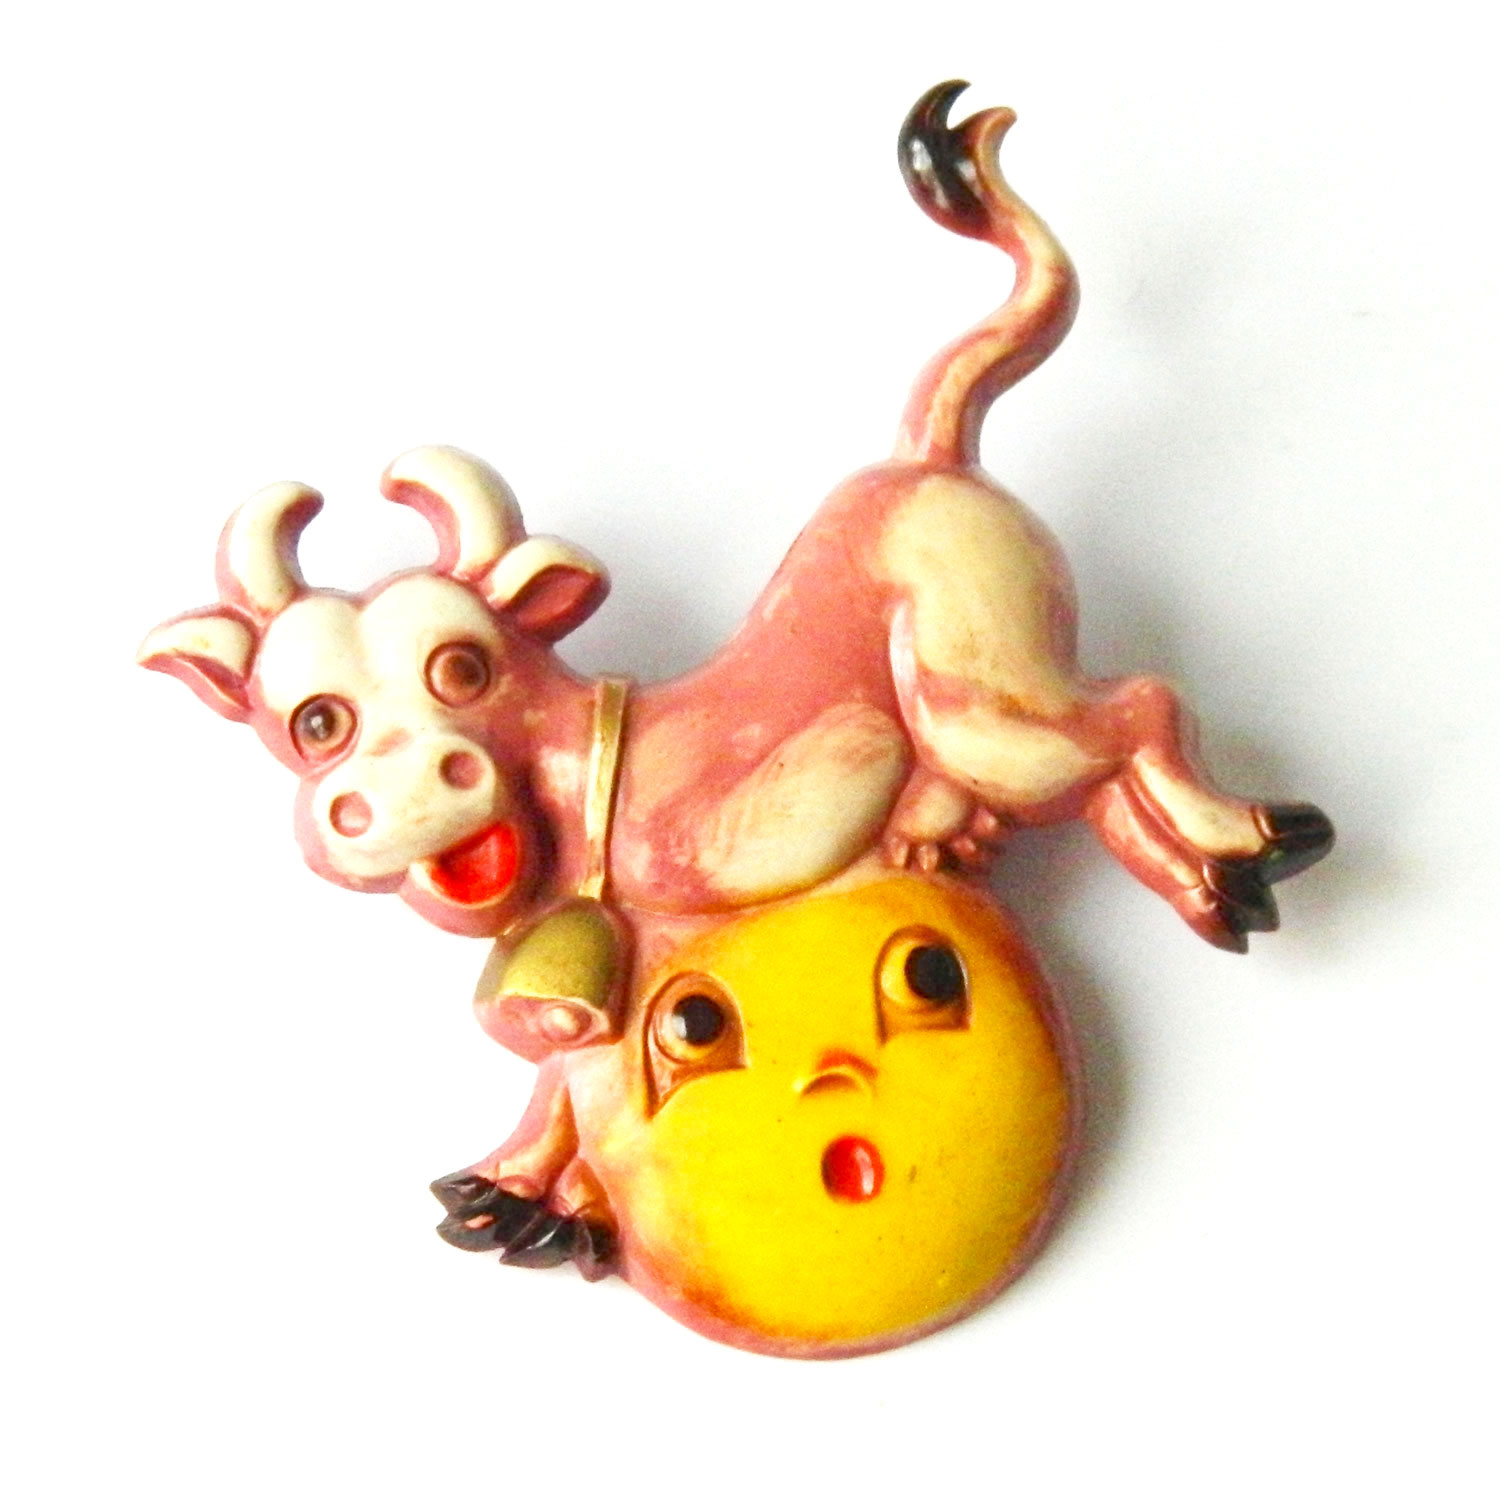 1930's The Cow Jumped Over The Moon brooch